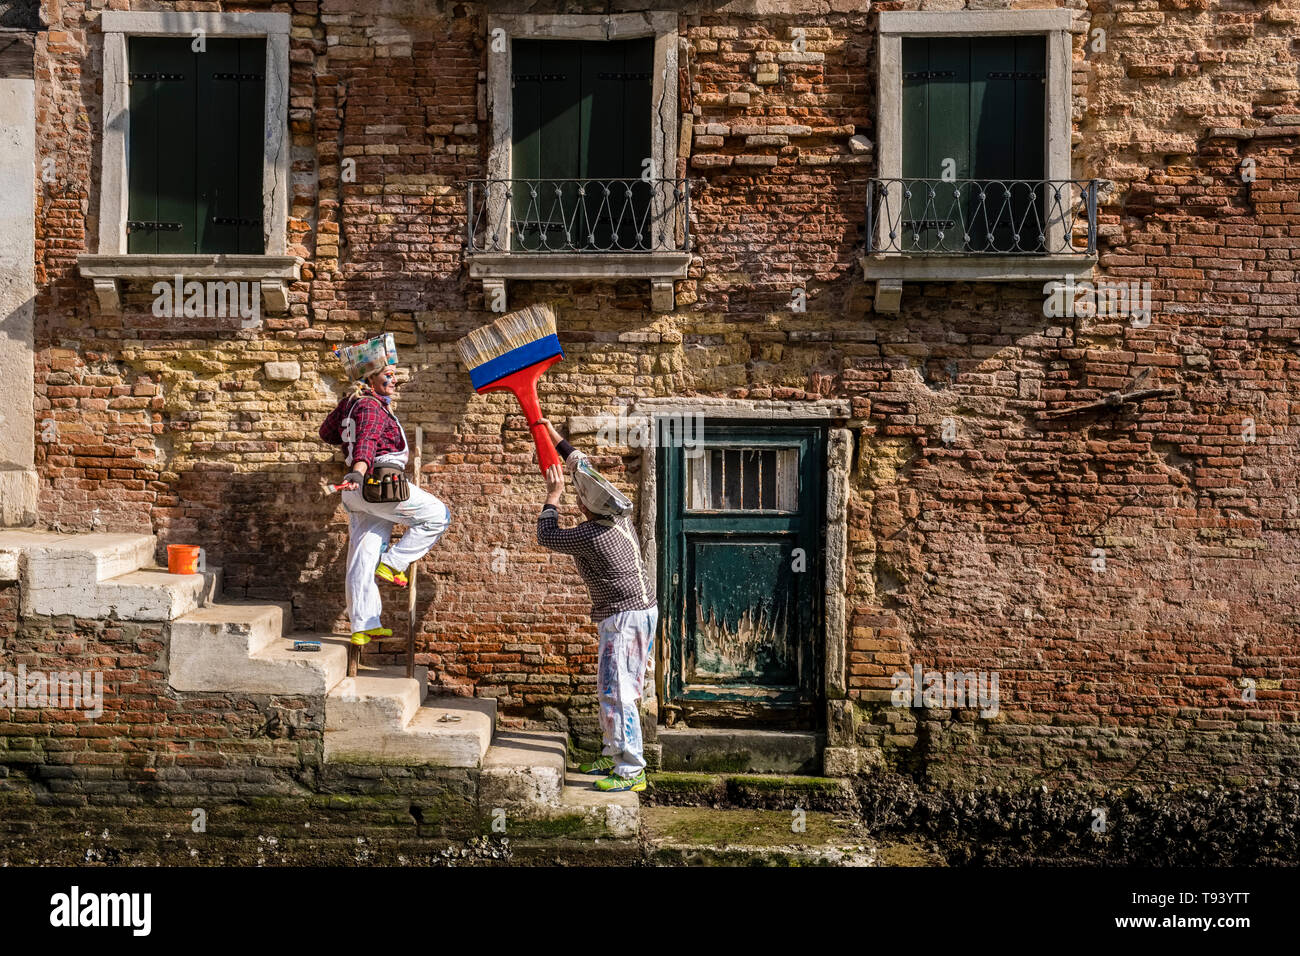 Two as painters and craftsmen masked persons in beautiful creative costumes, posing in front of an ailing house facade across a small water canal, cel Stock Photo